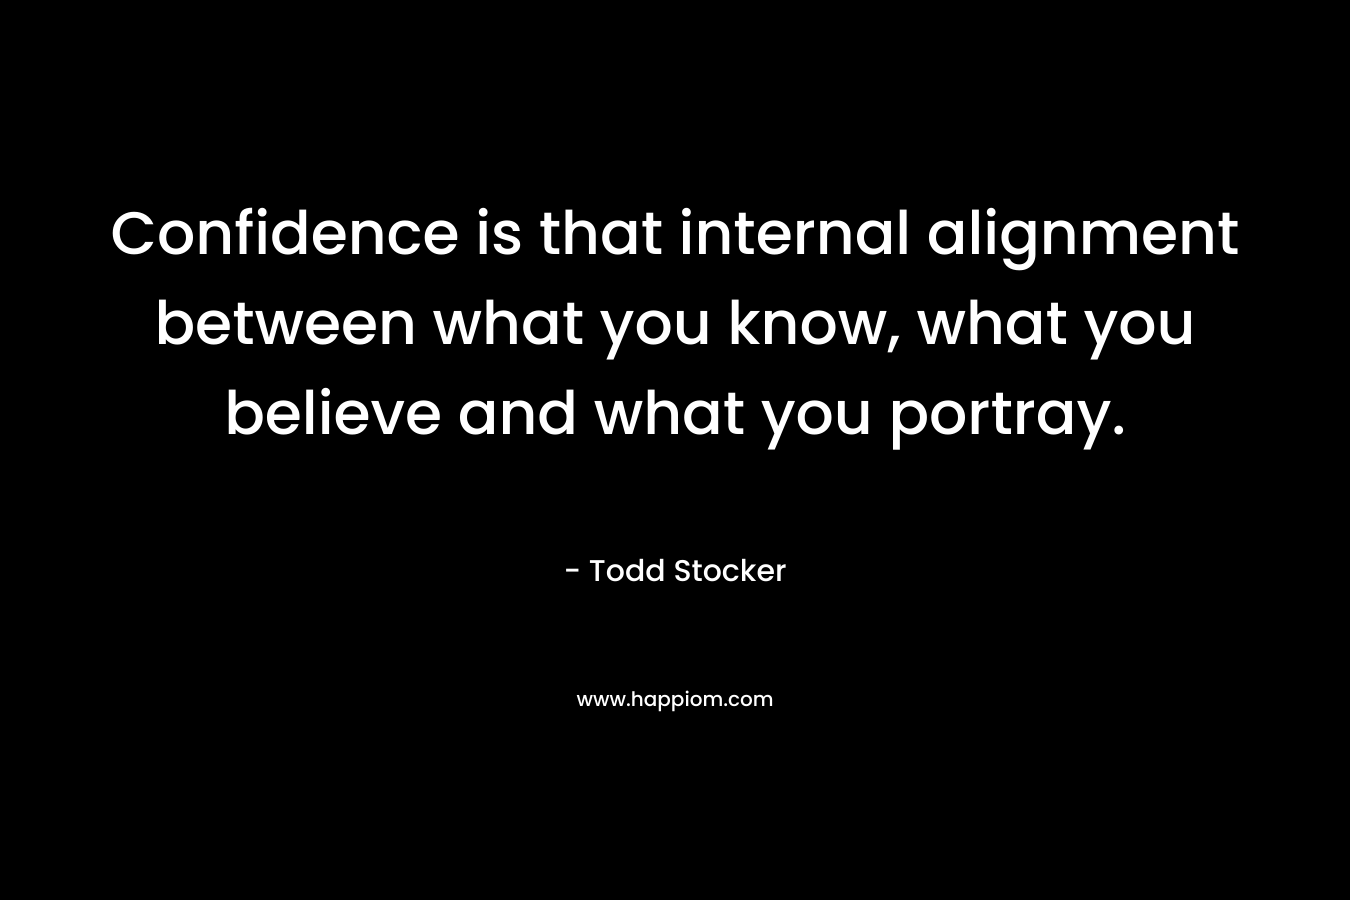 Confidence is that internal alignment between what you know, what you believe and what you portray. – Todd Stocker